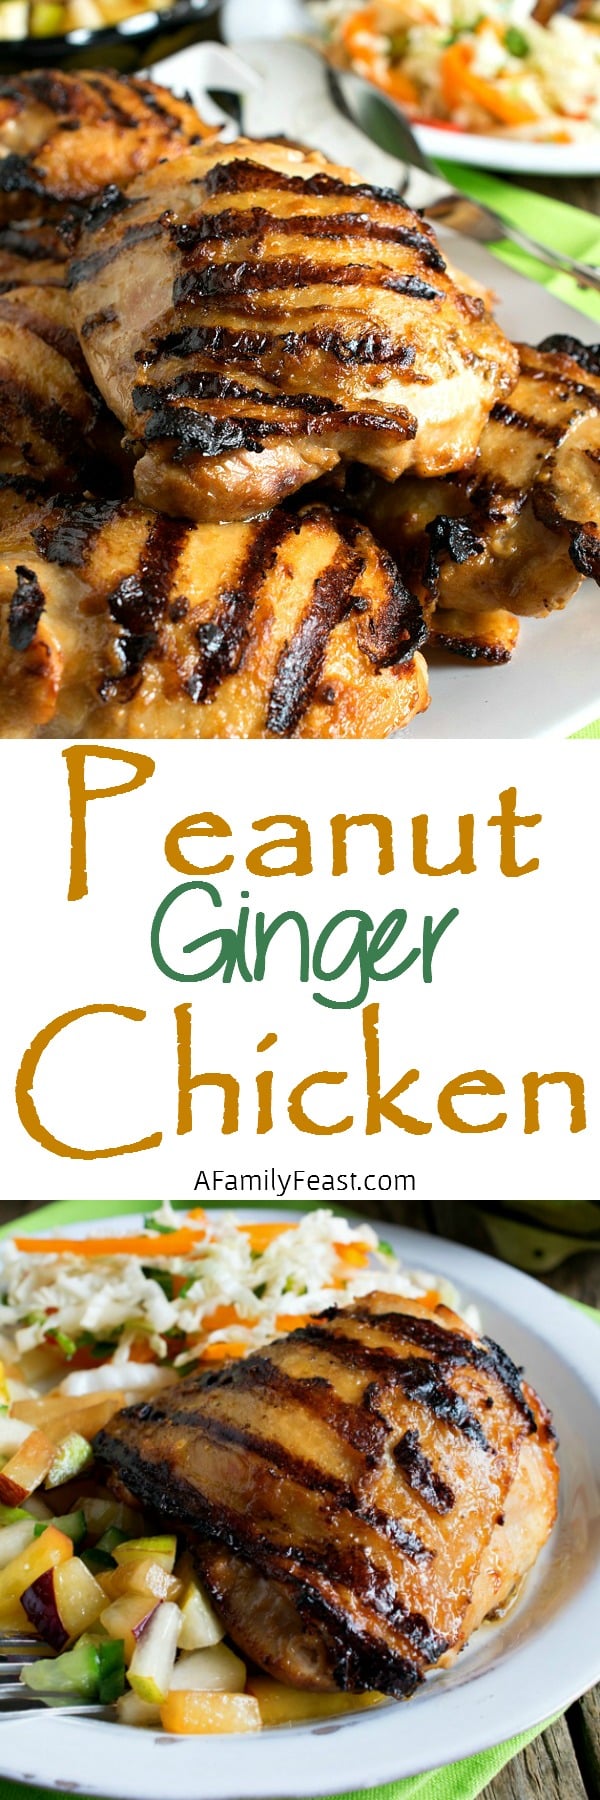 Peanut Ginger Chicken - A Family Feast